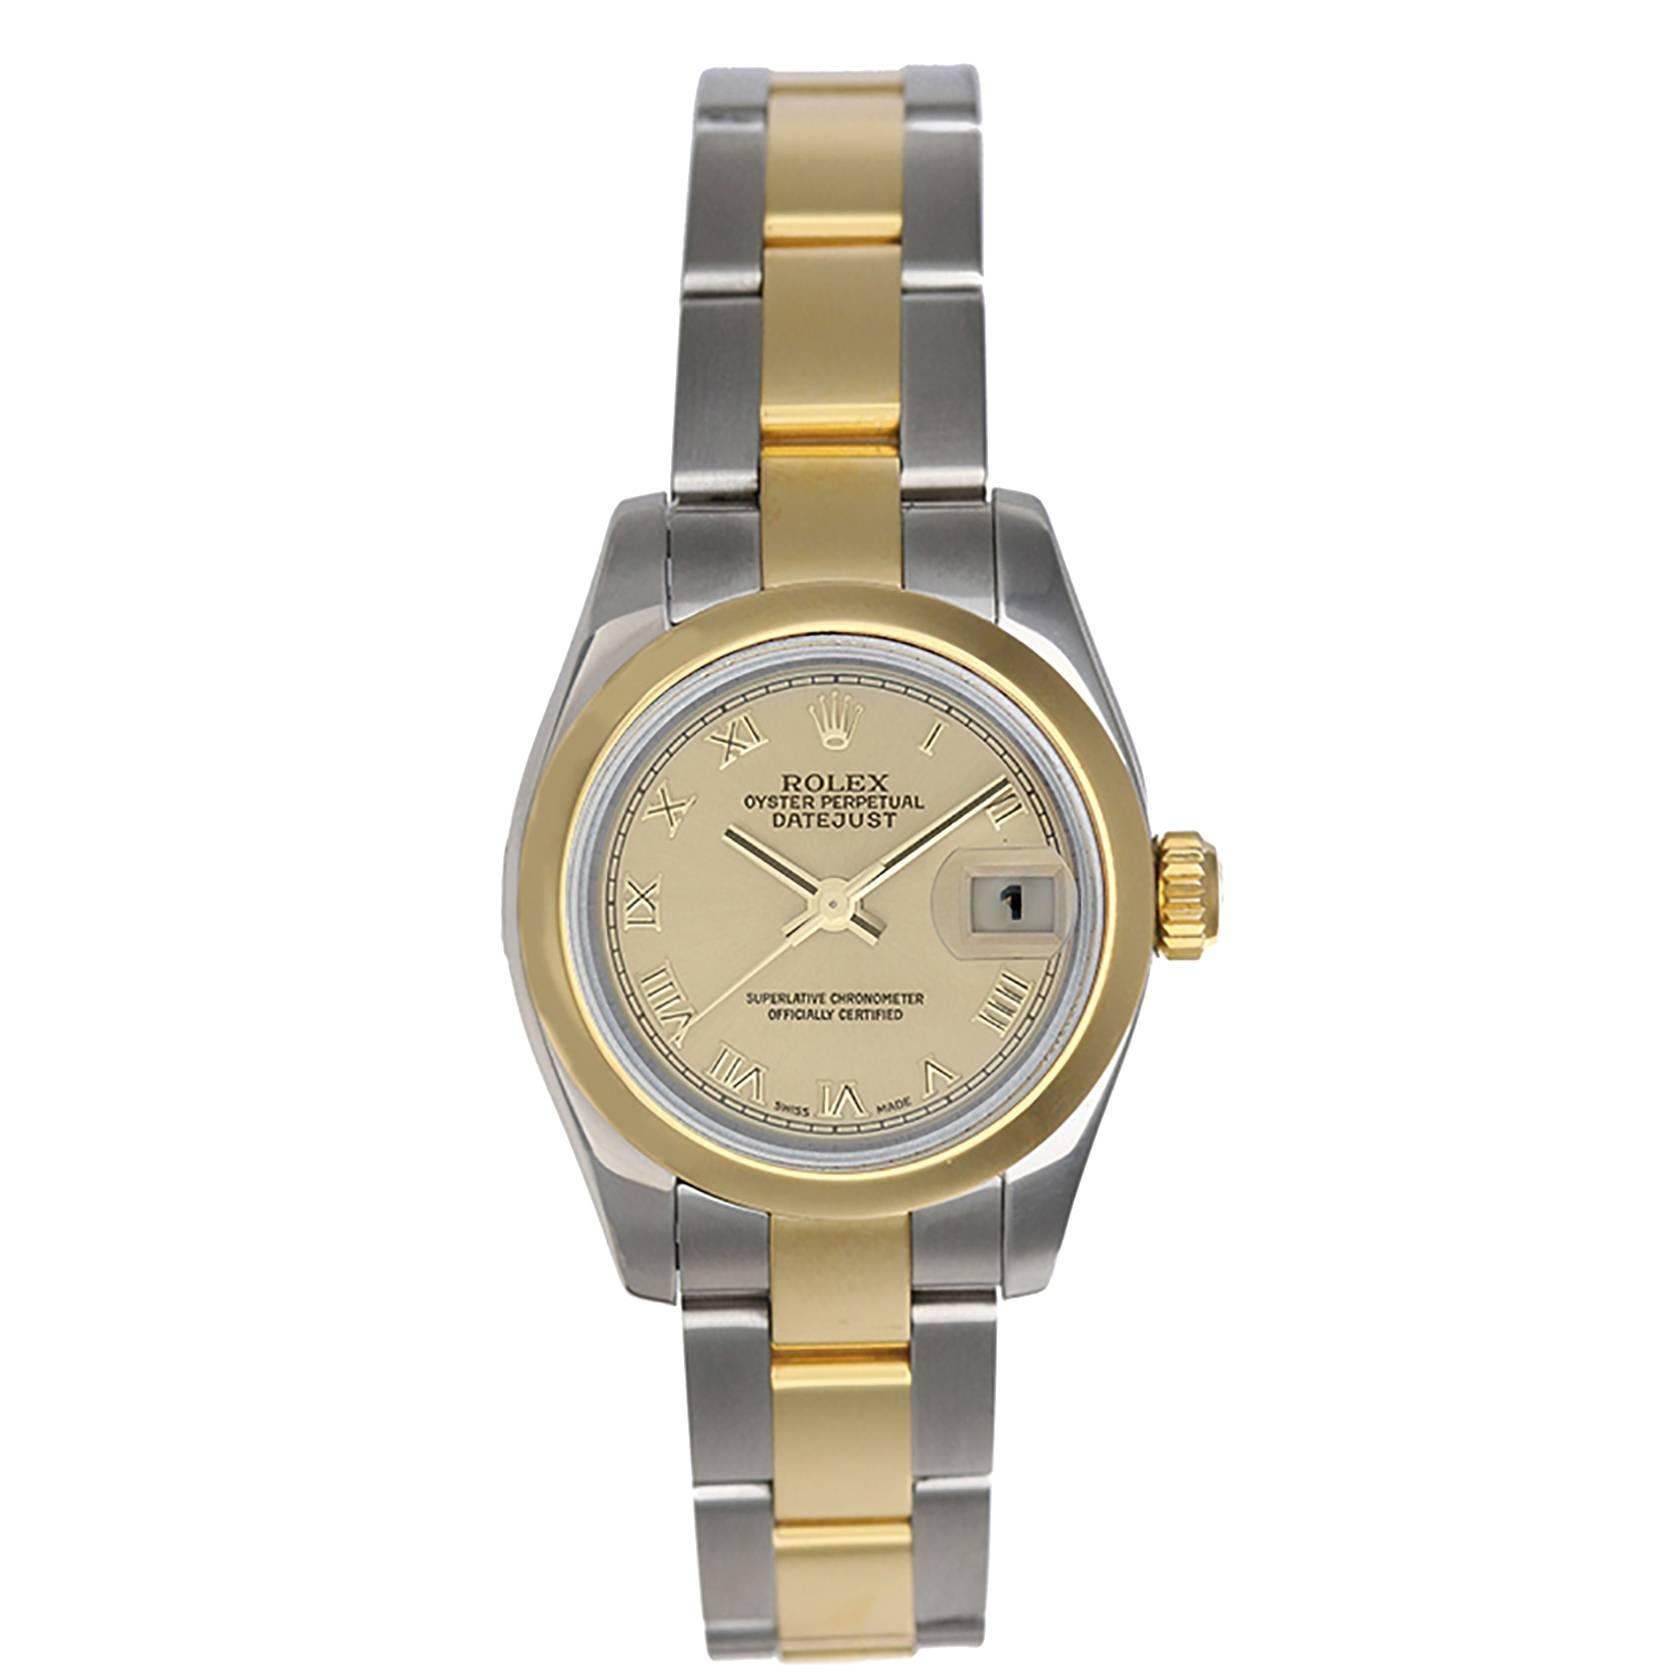 Rolex lady's Yellow gold stainless steel Datejust Automatic Wristwatch 